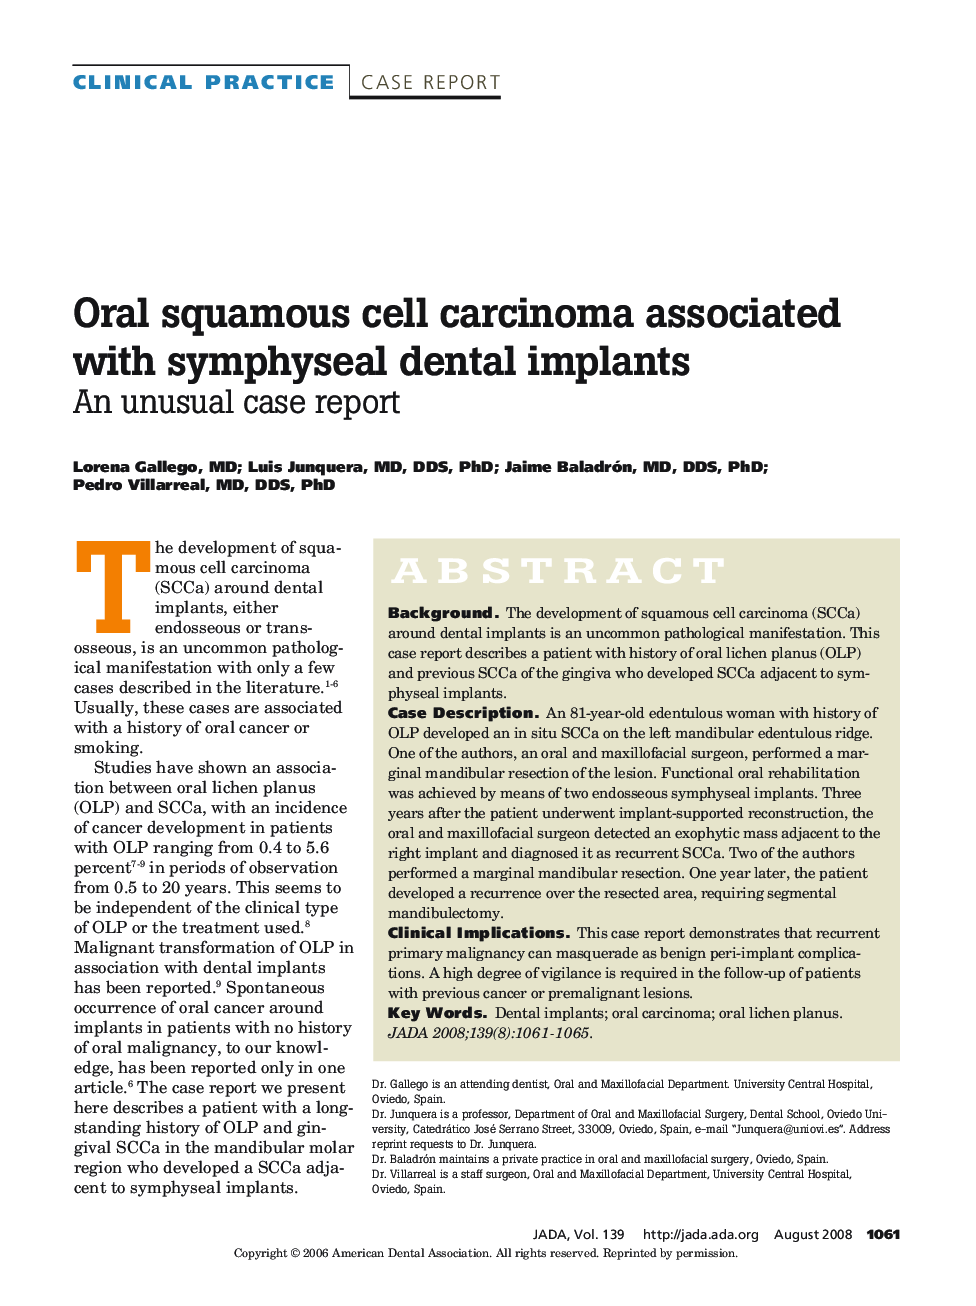 Oral Squamous Cell Carcinoma Associated With Symphyseal Dental Implants : An Unusual Case Report